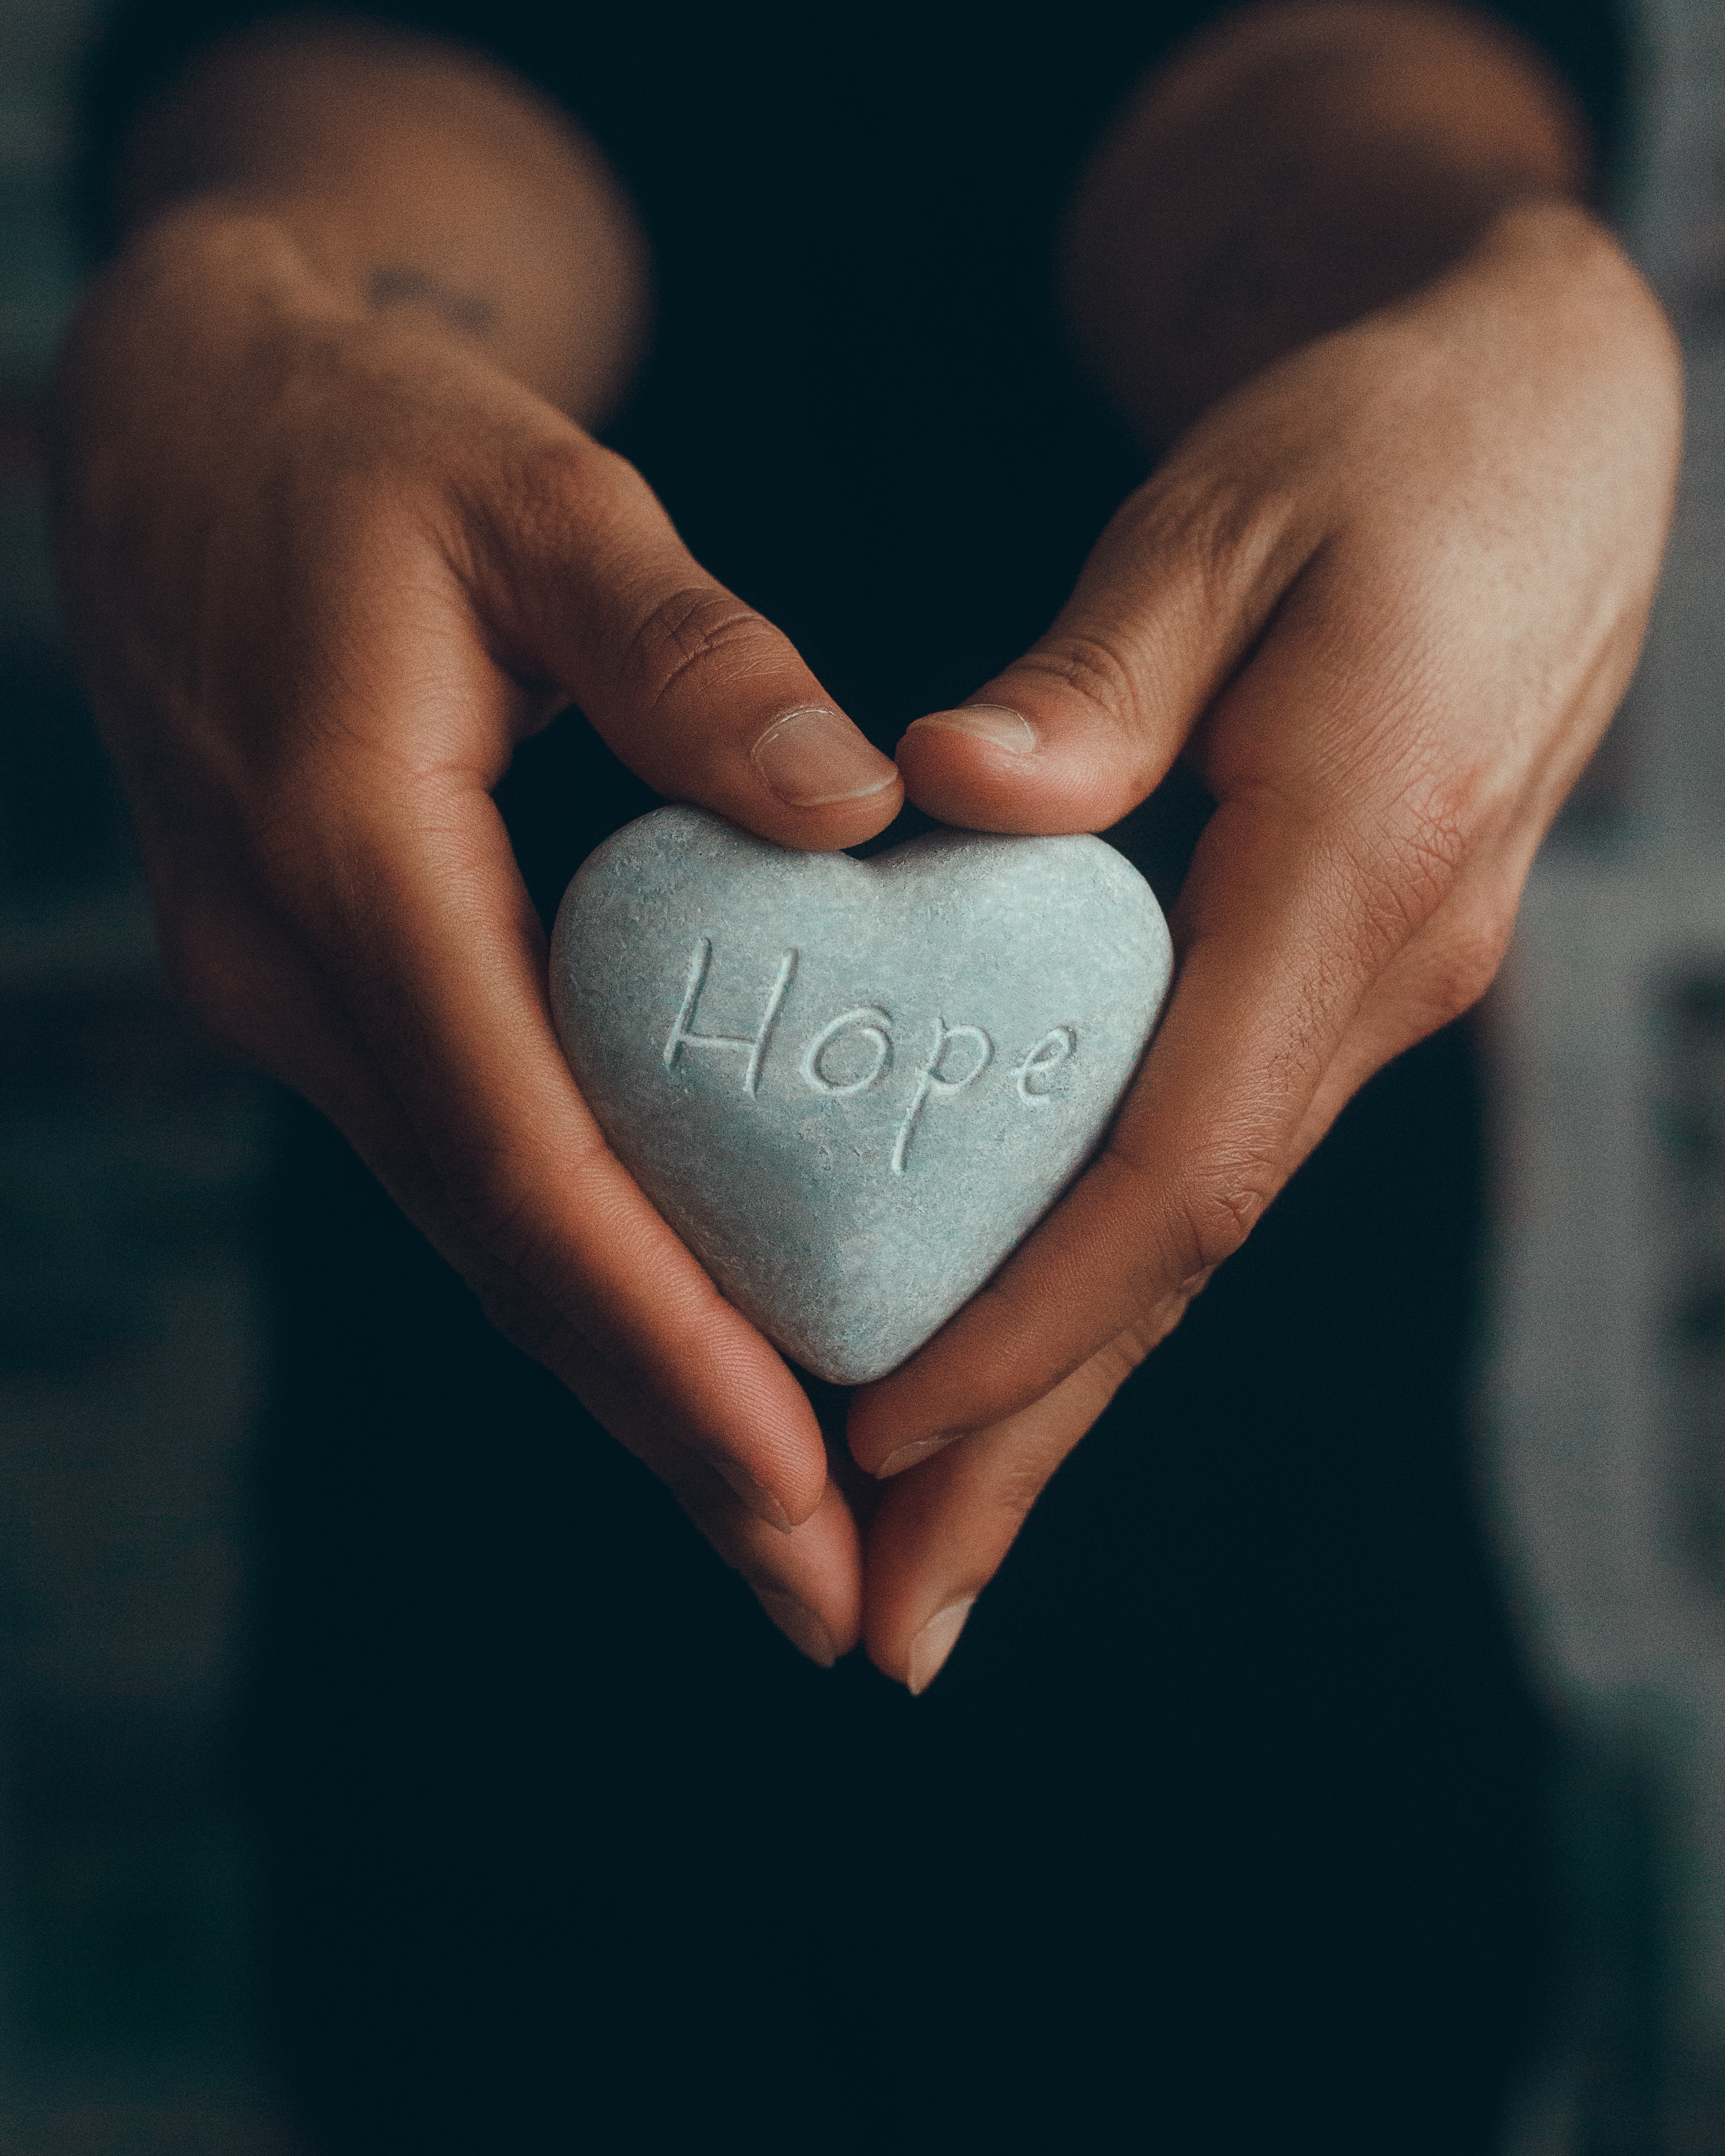 android hope, inscription, words, heart, rock, hands, stone, word